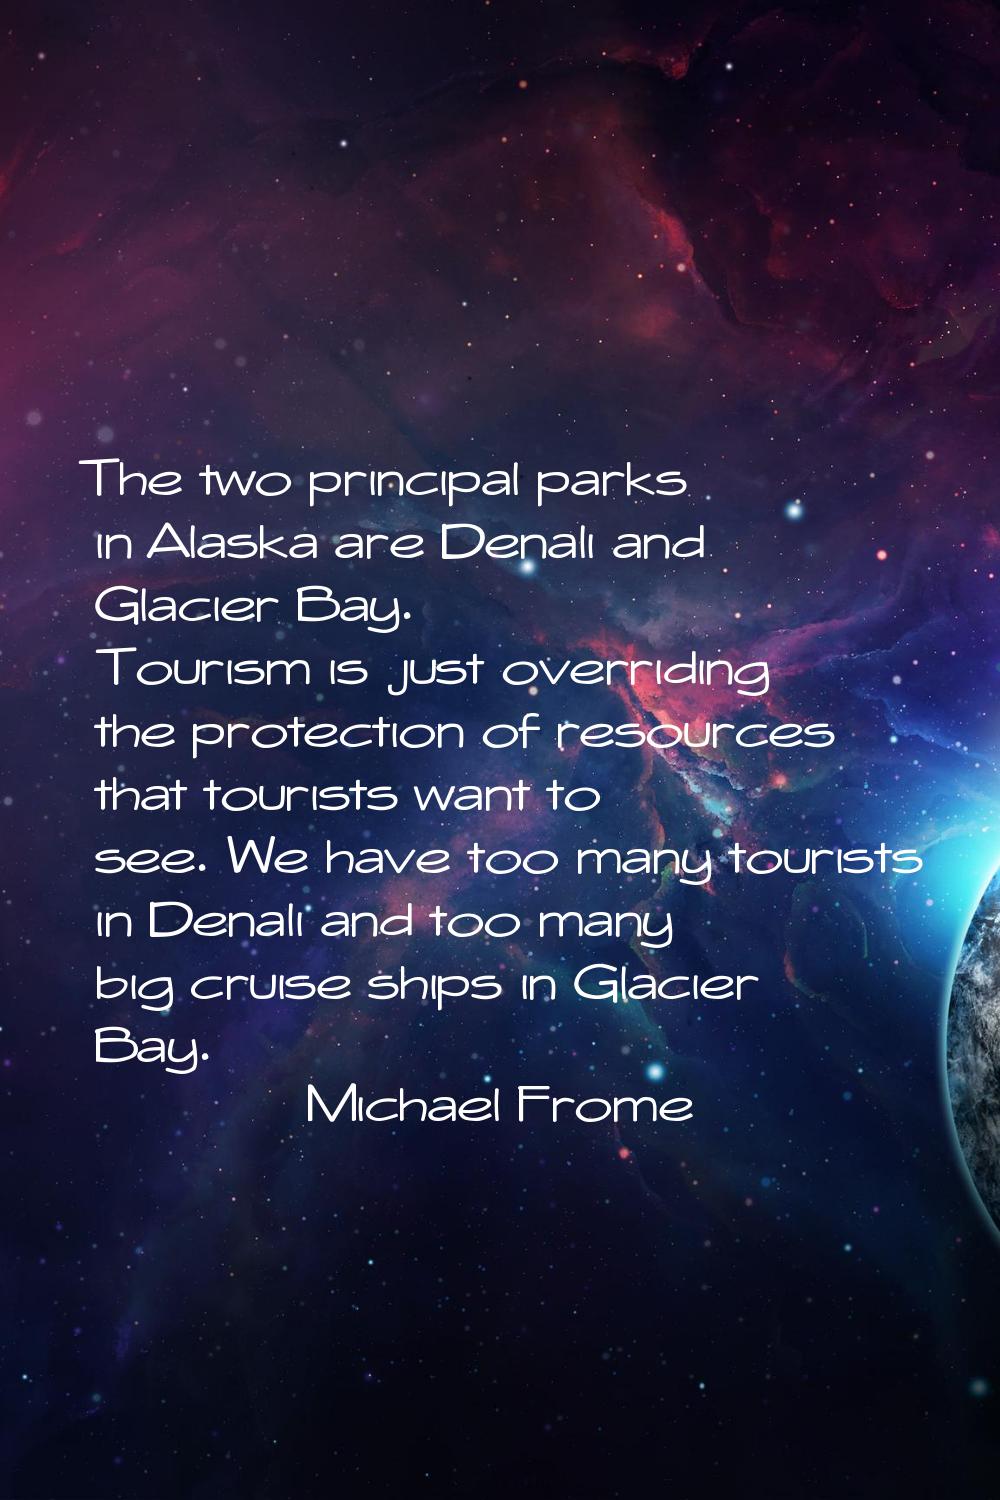 The two principal parks in Alaska are Denali and Glacier Bay. Tourism is just overriding the protec